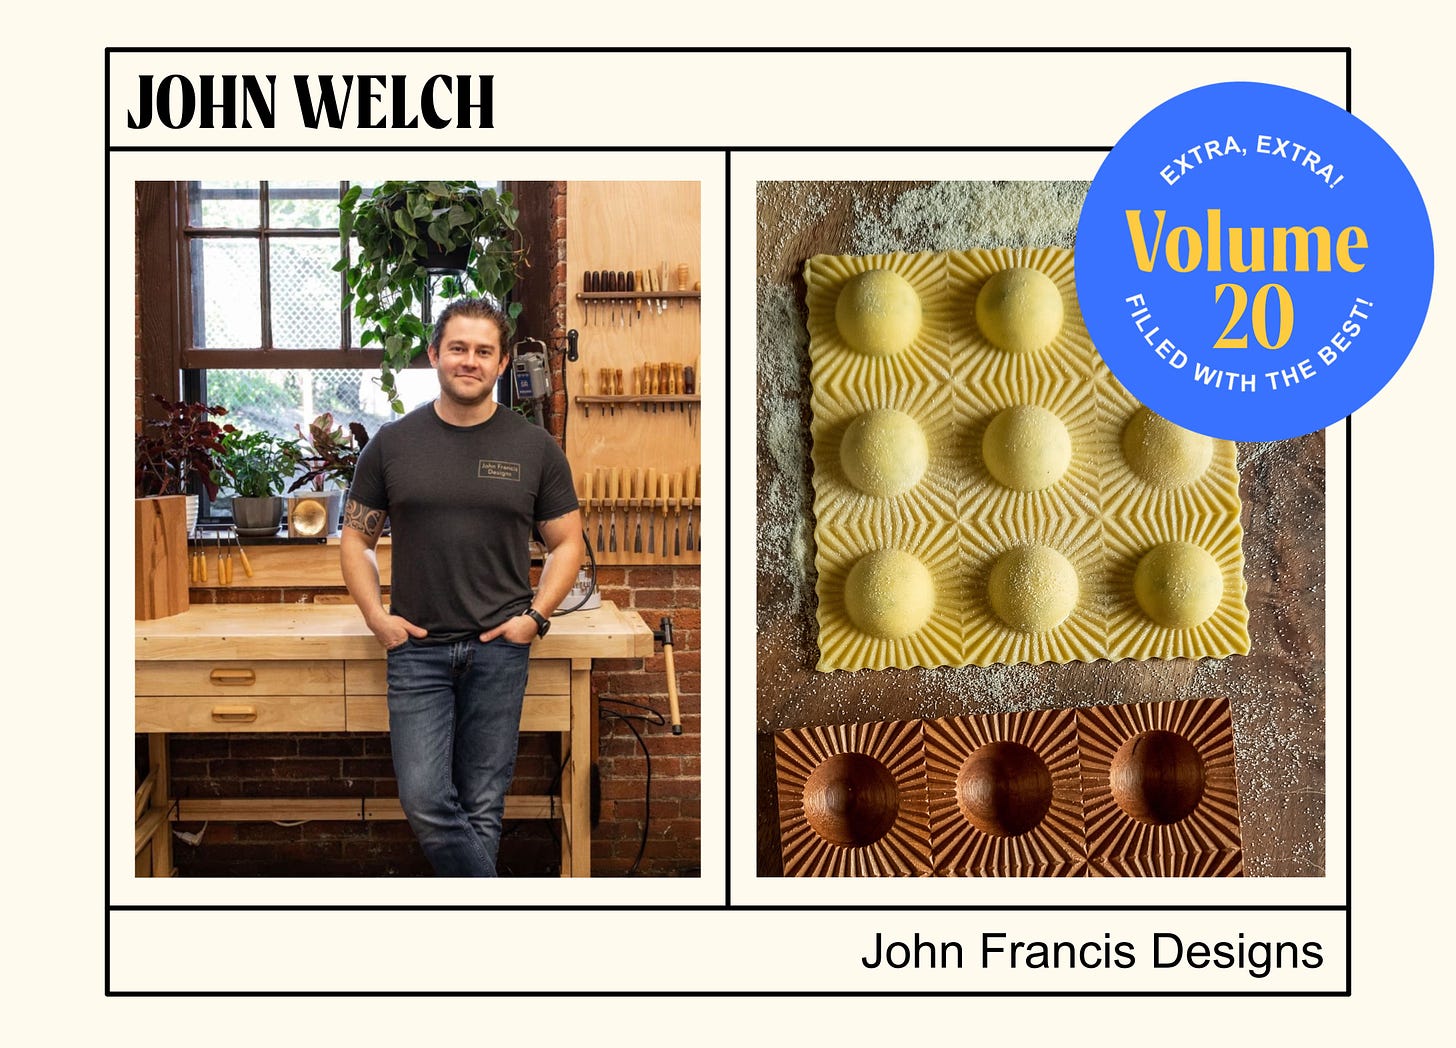 A photo of John Welch of John Welch Designs standing in his workshop, as well as a photo of ravioli made using his ravioletti mold.